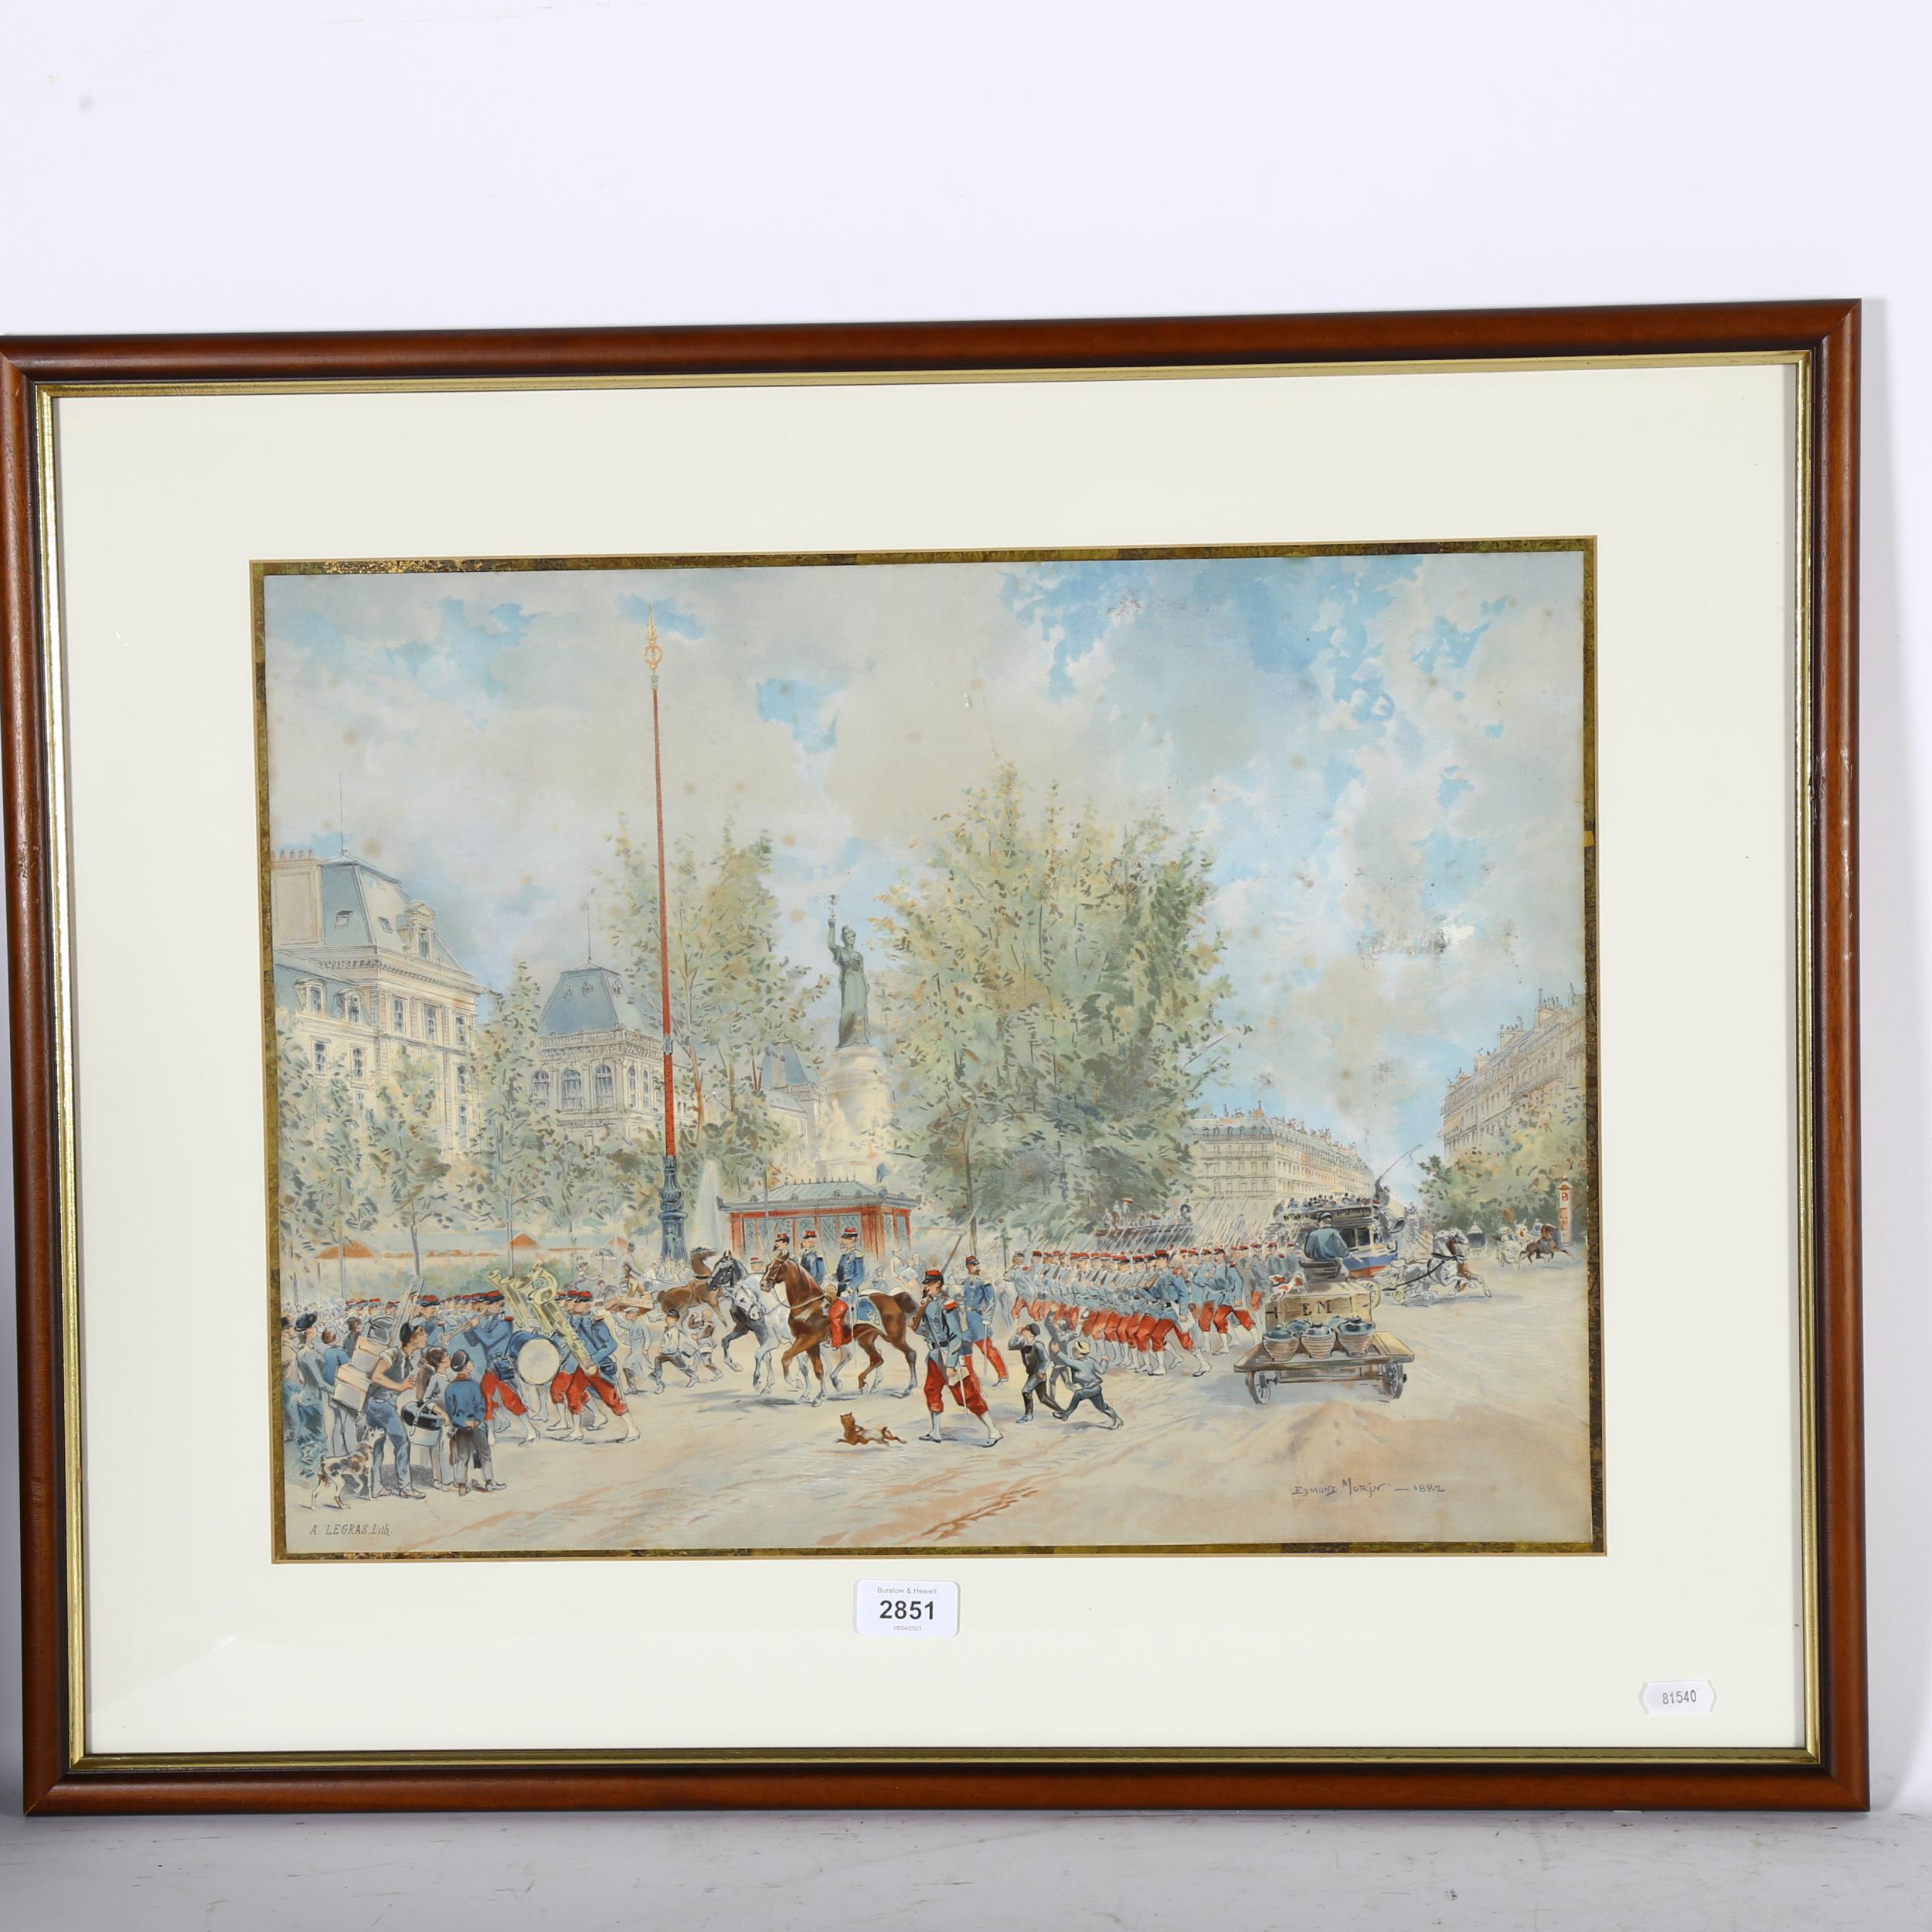 A pair of French lithographs, marching soldiers and street scene, by A Legras, original works by - Image 2 of 2